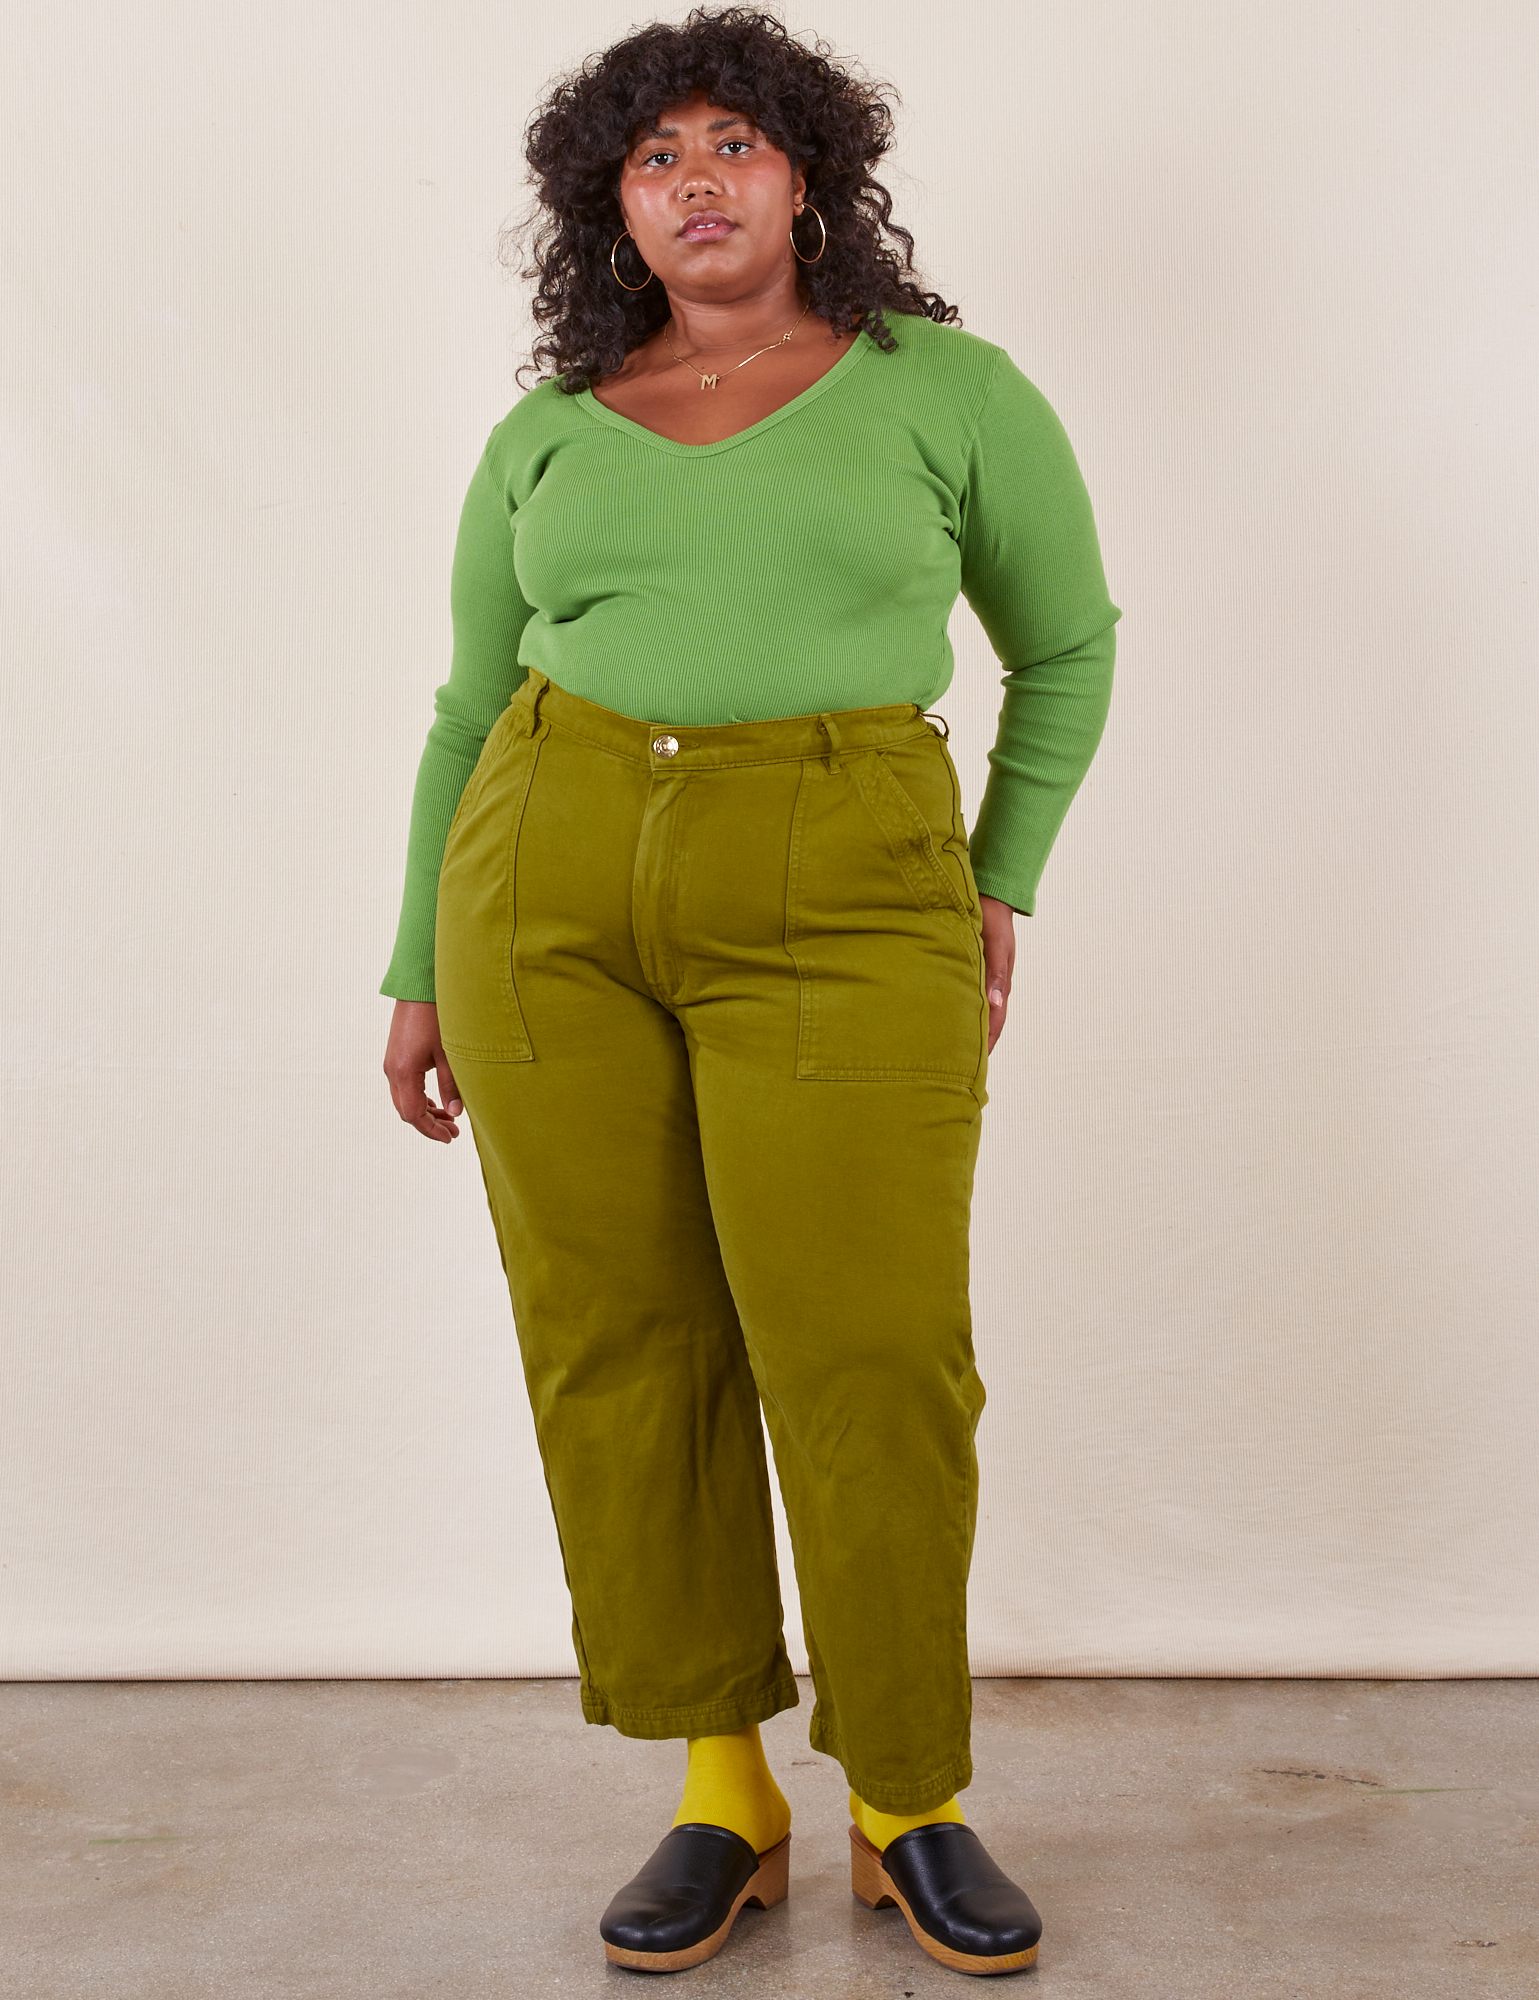 Morgan is 5&#39;5&quot; and wearing Petite 1XL Work Pants in Olive Green paired with bright olive Long Sleeve V-Neck Tee